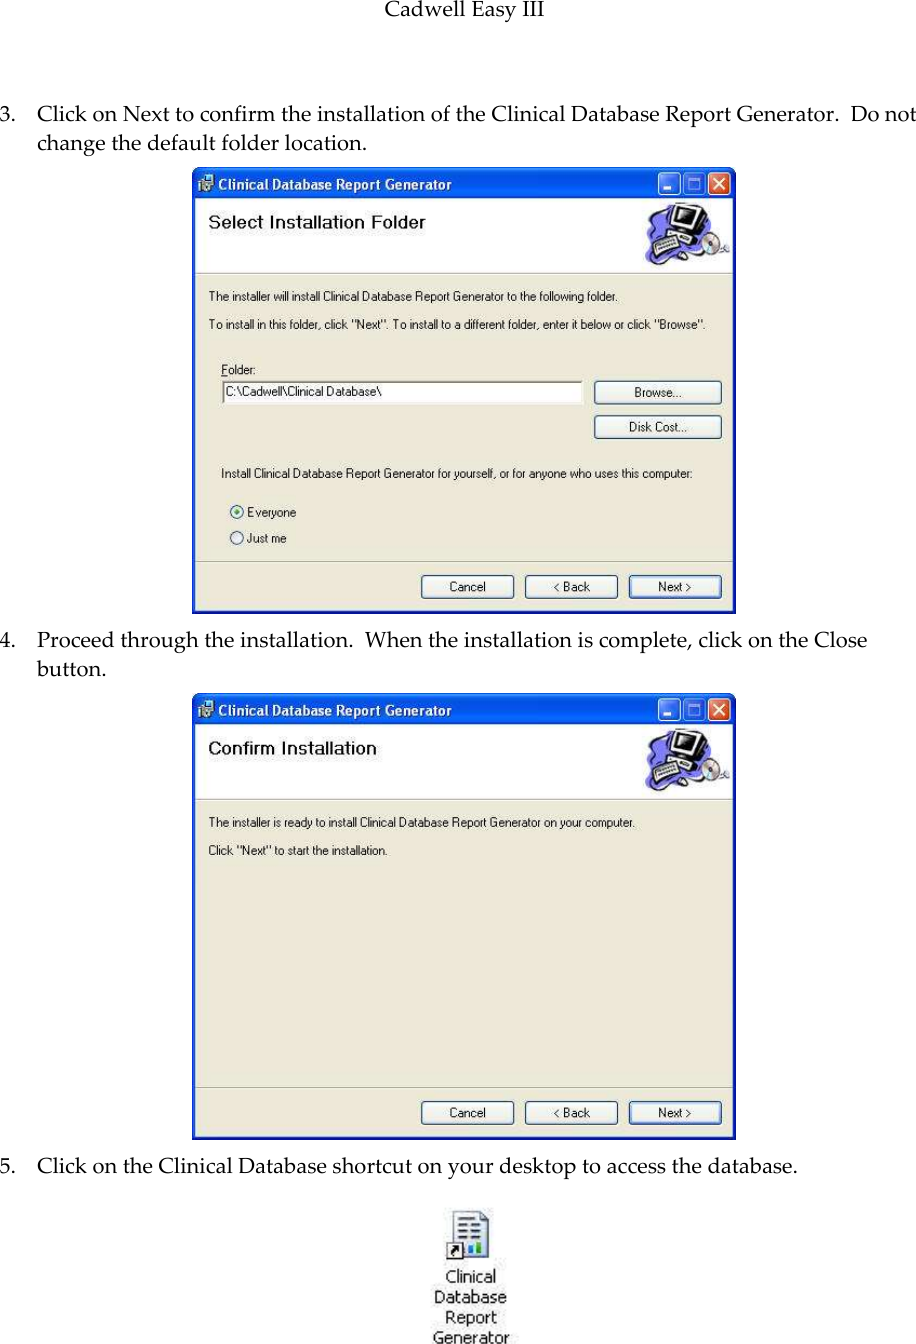 Cadwell Easy III  87  3. Click on Next to confirm the installation of the Clinical Database Report Generator.  Do not change the default folder location.    4. Proceed through the installation.  When the installation is complete, click on the Close button.  5. Click on the Clinical Database shortcut on your desktop to access the database.   